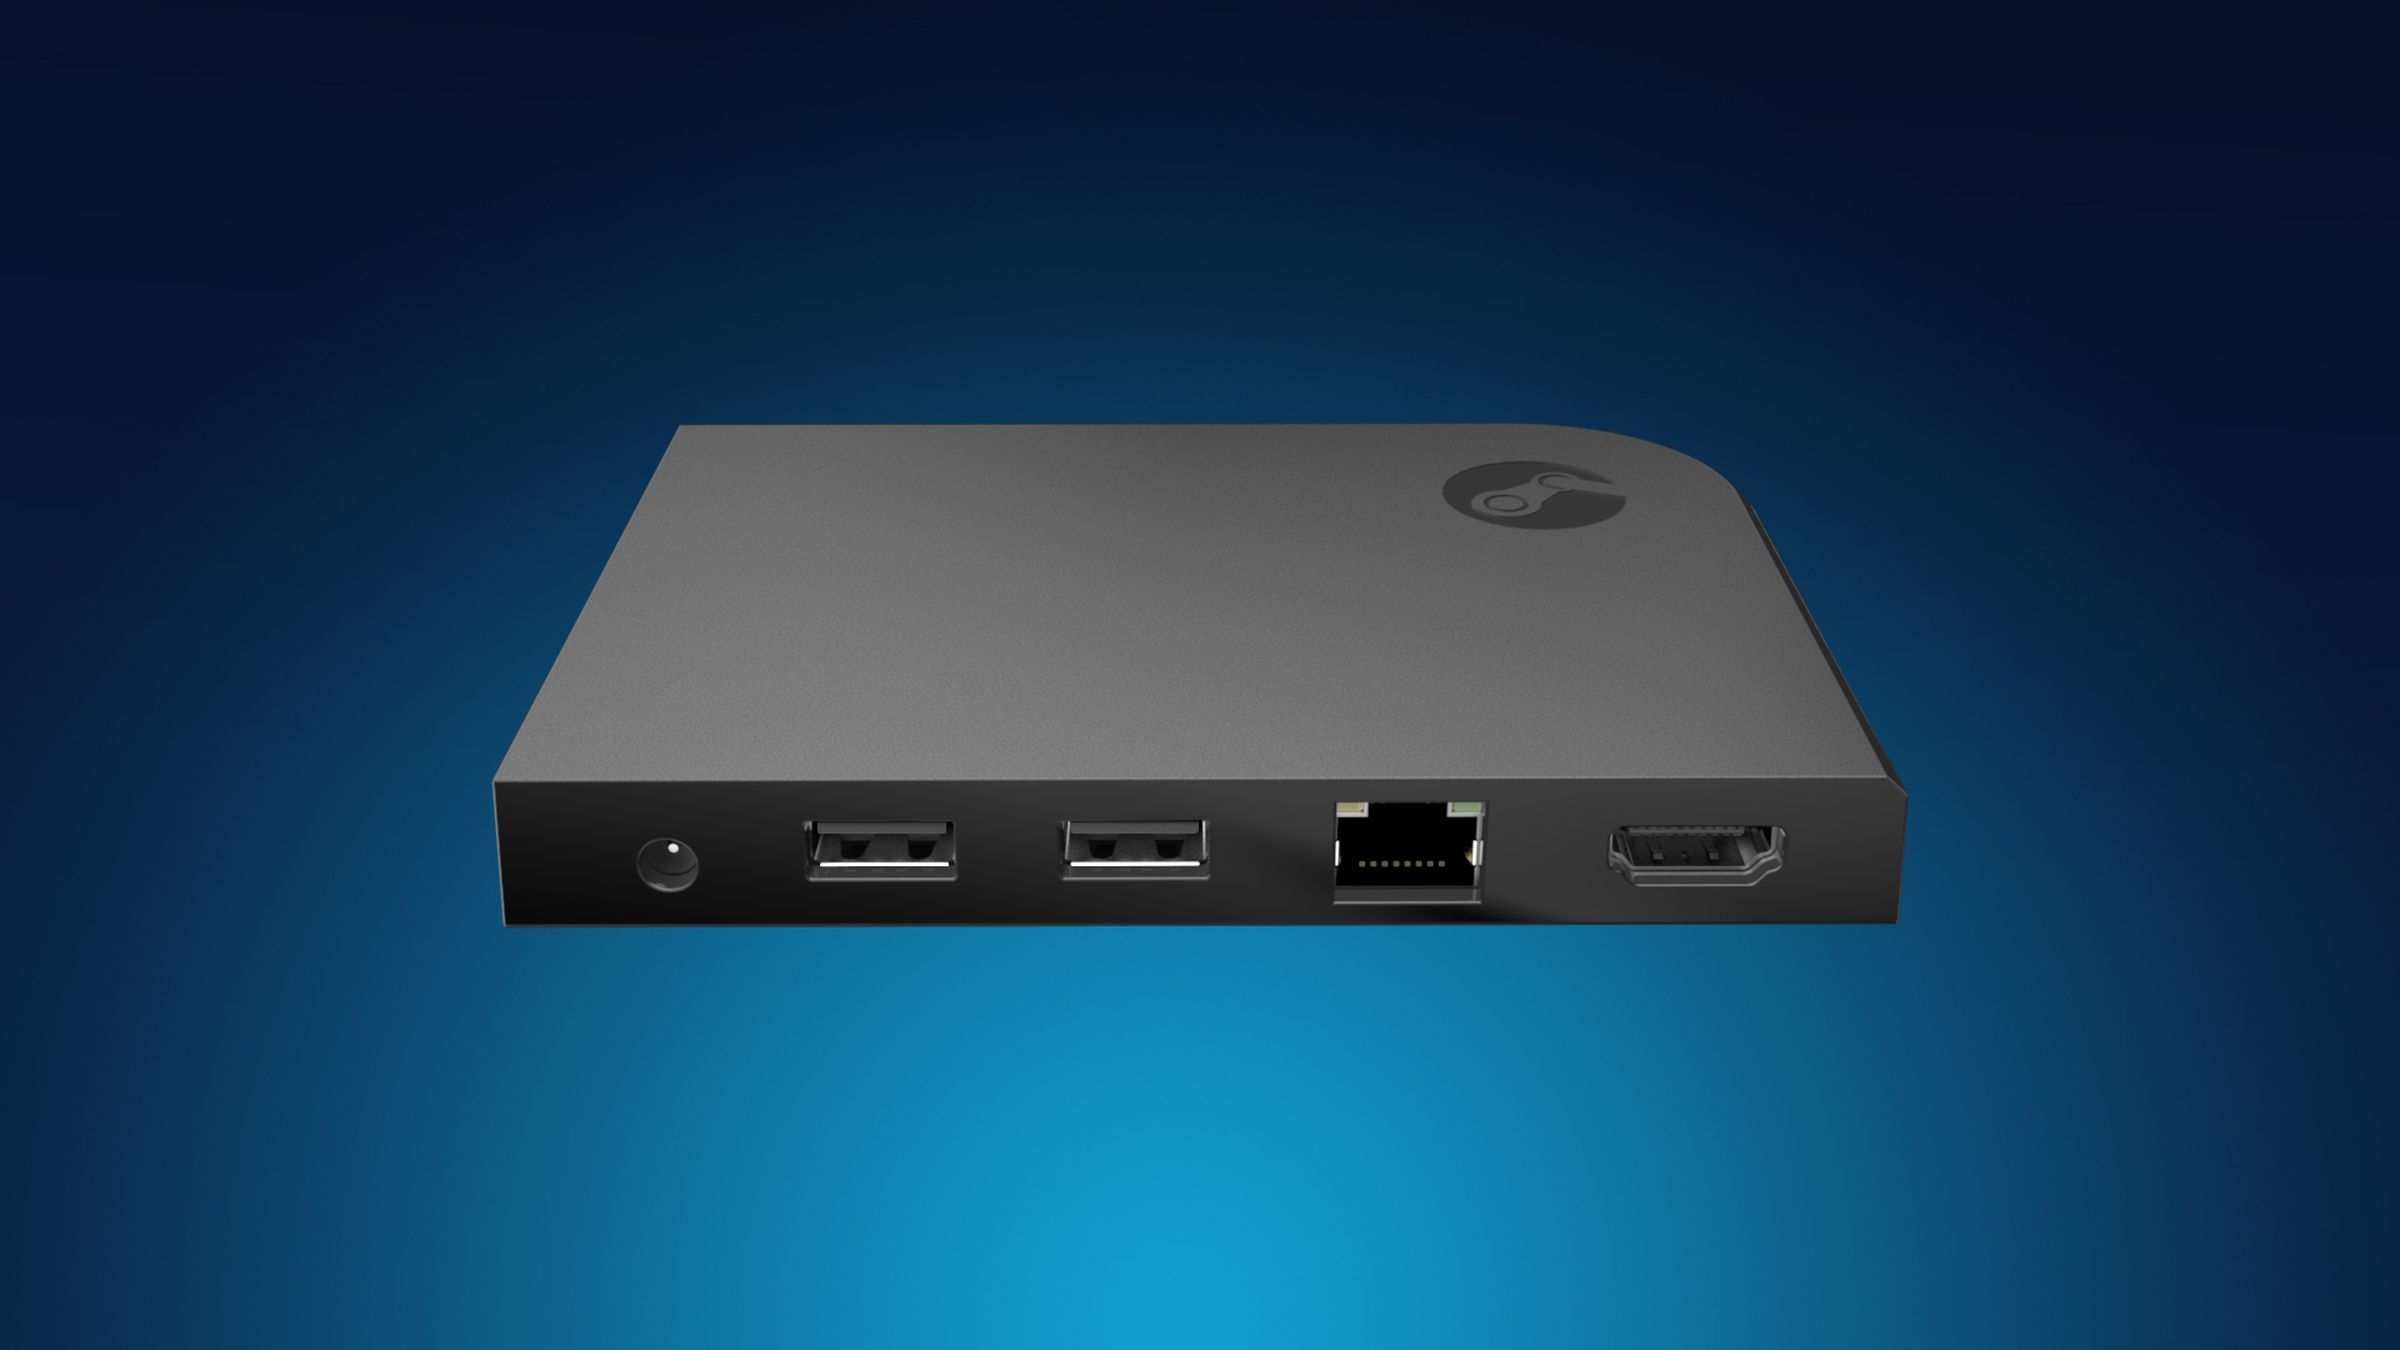 Steam link on a blue background.